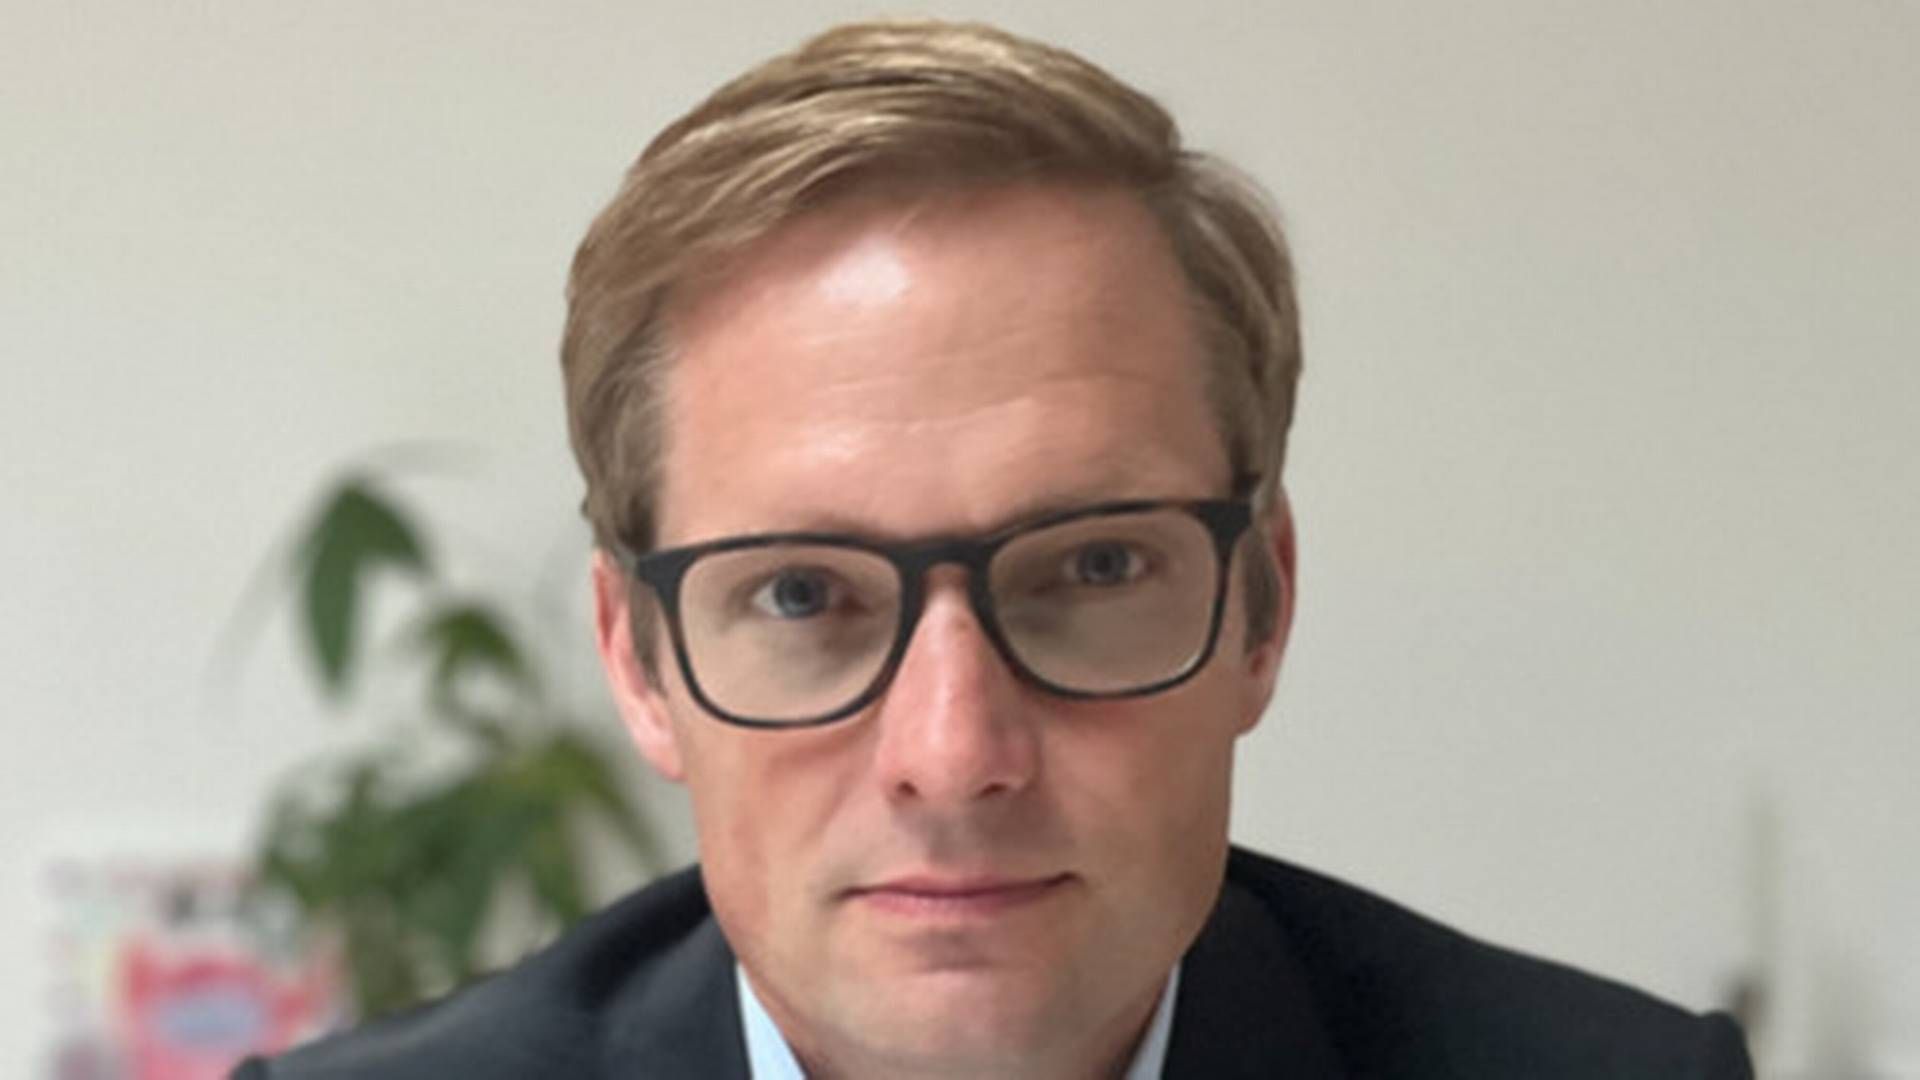 Alm. Brand's new chief investment officer has previously worked for the Danish Ministry of Finance, the Danish National Bank, Bankinvest and most recently as an external consultant for asset management in Nykredit. | Photo: PR/Alm Brand